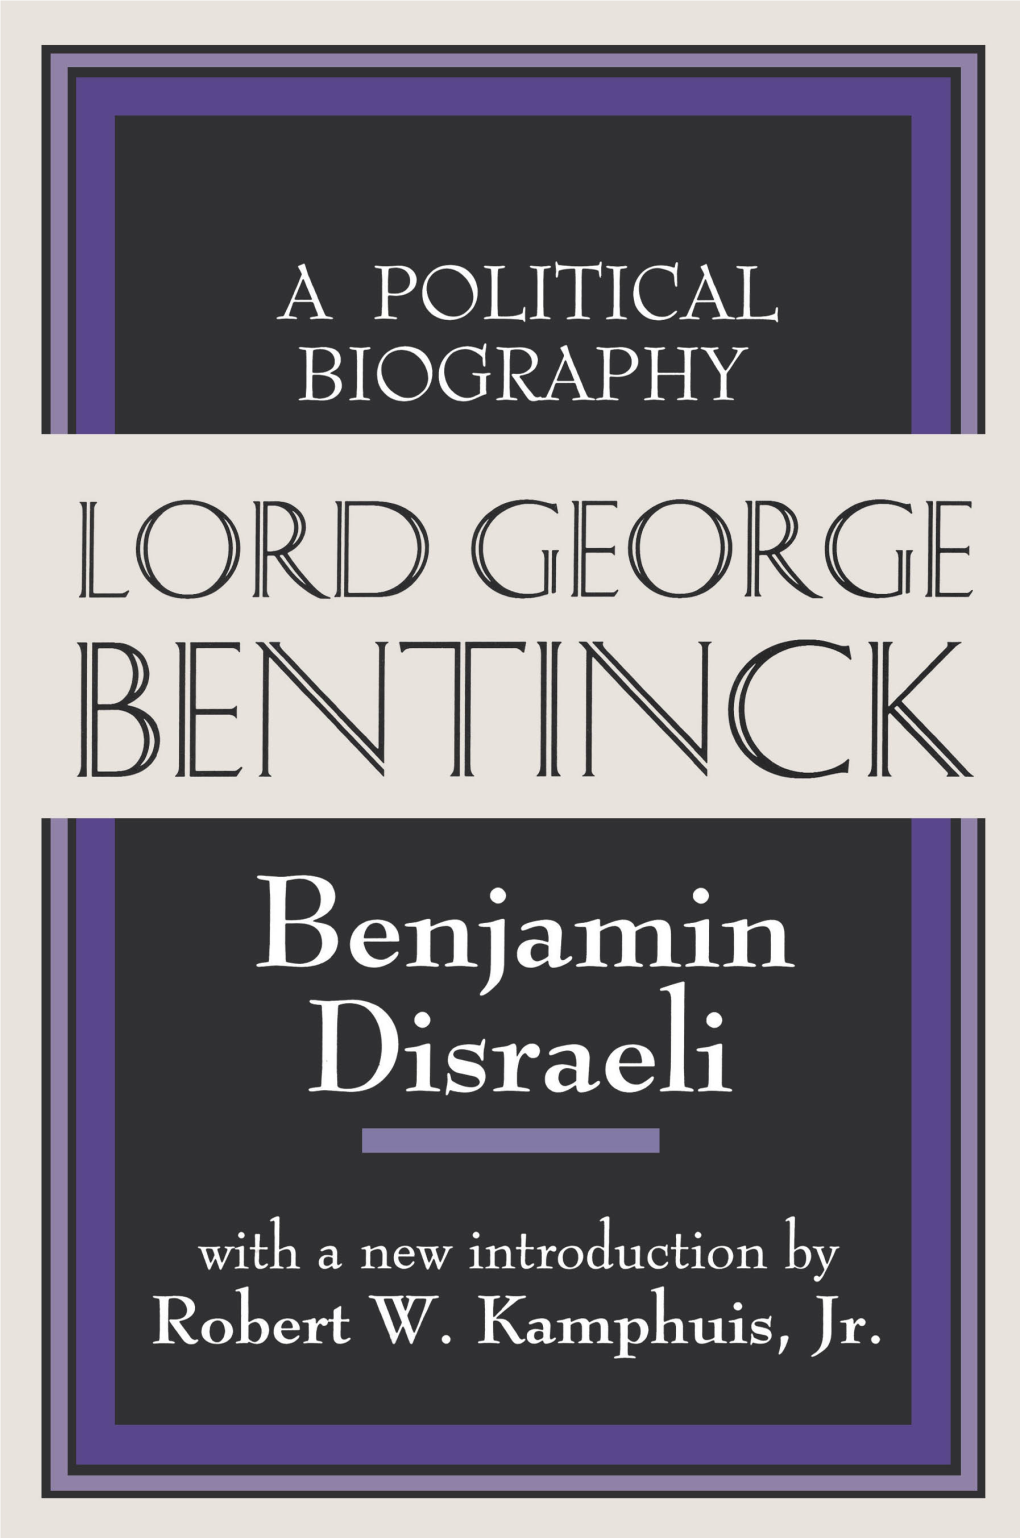 LORD GEORGE BENTINCK the Library of Conservative Thought Milton Hindus, Series Editor Russell Kirk, Founding Series Editor